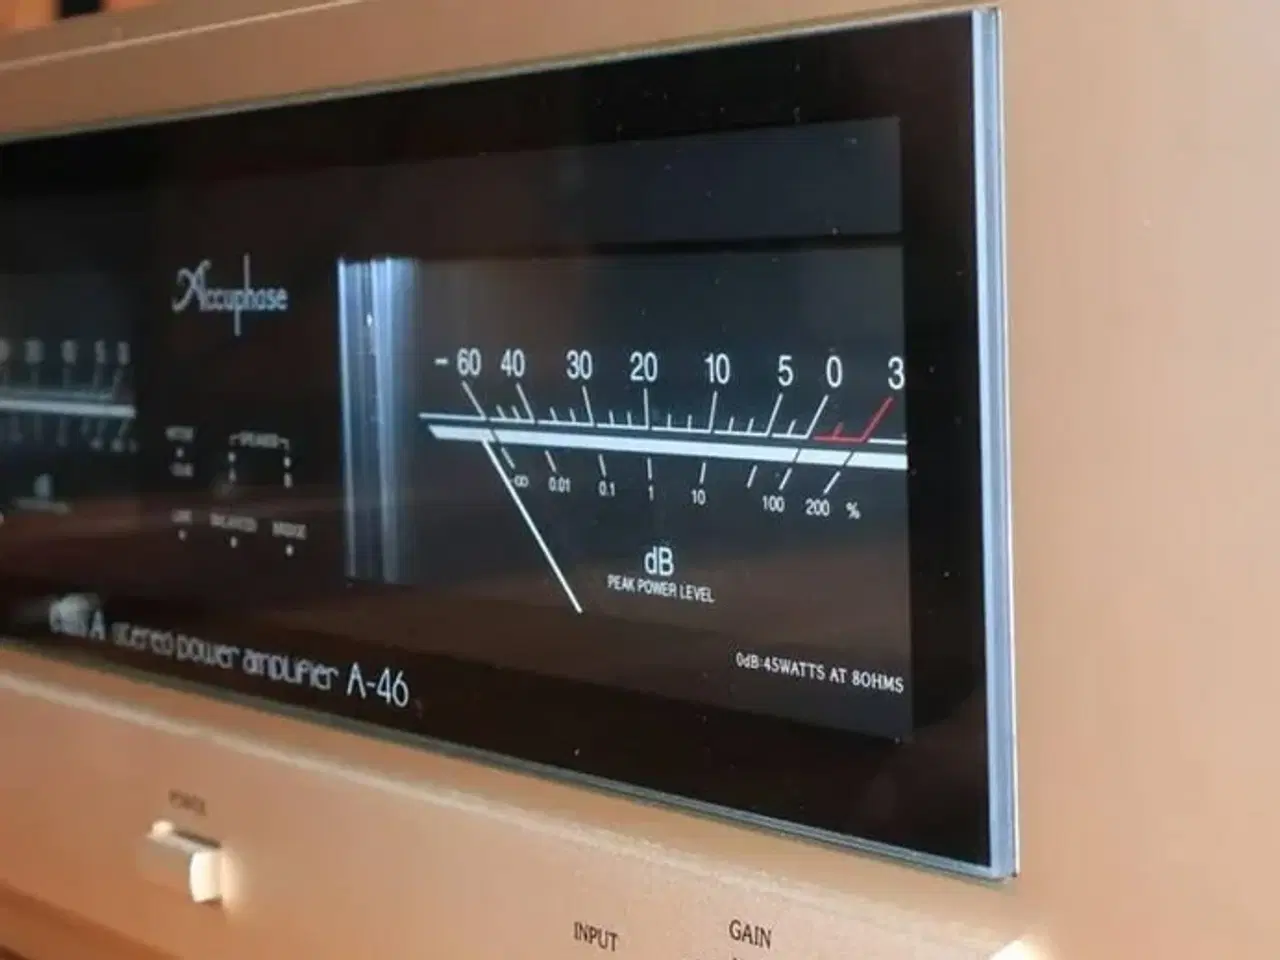 Billede 2 - Accuphase A-46 amplifier